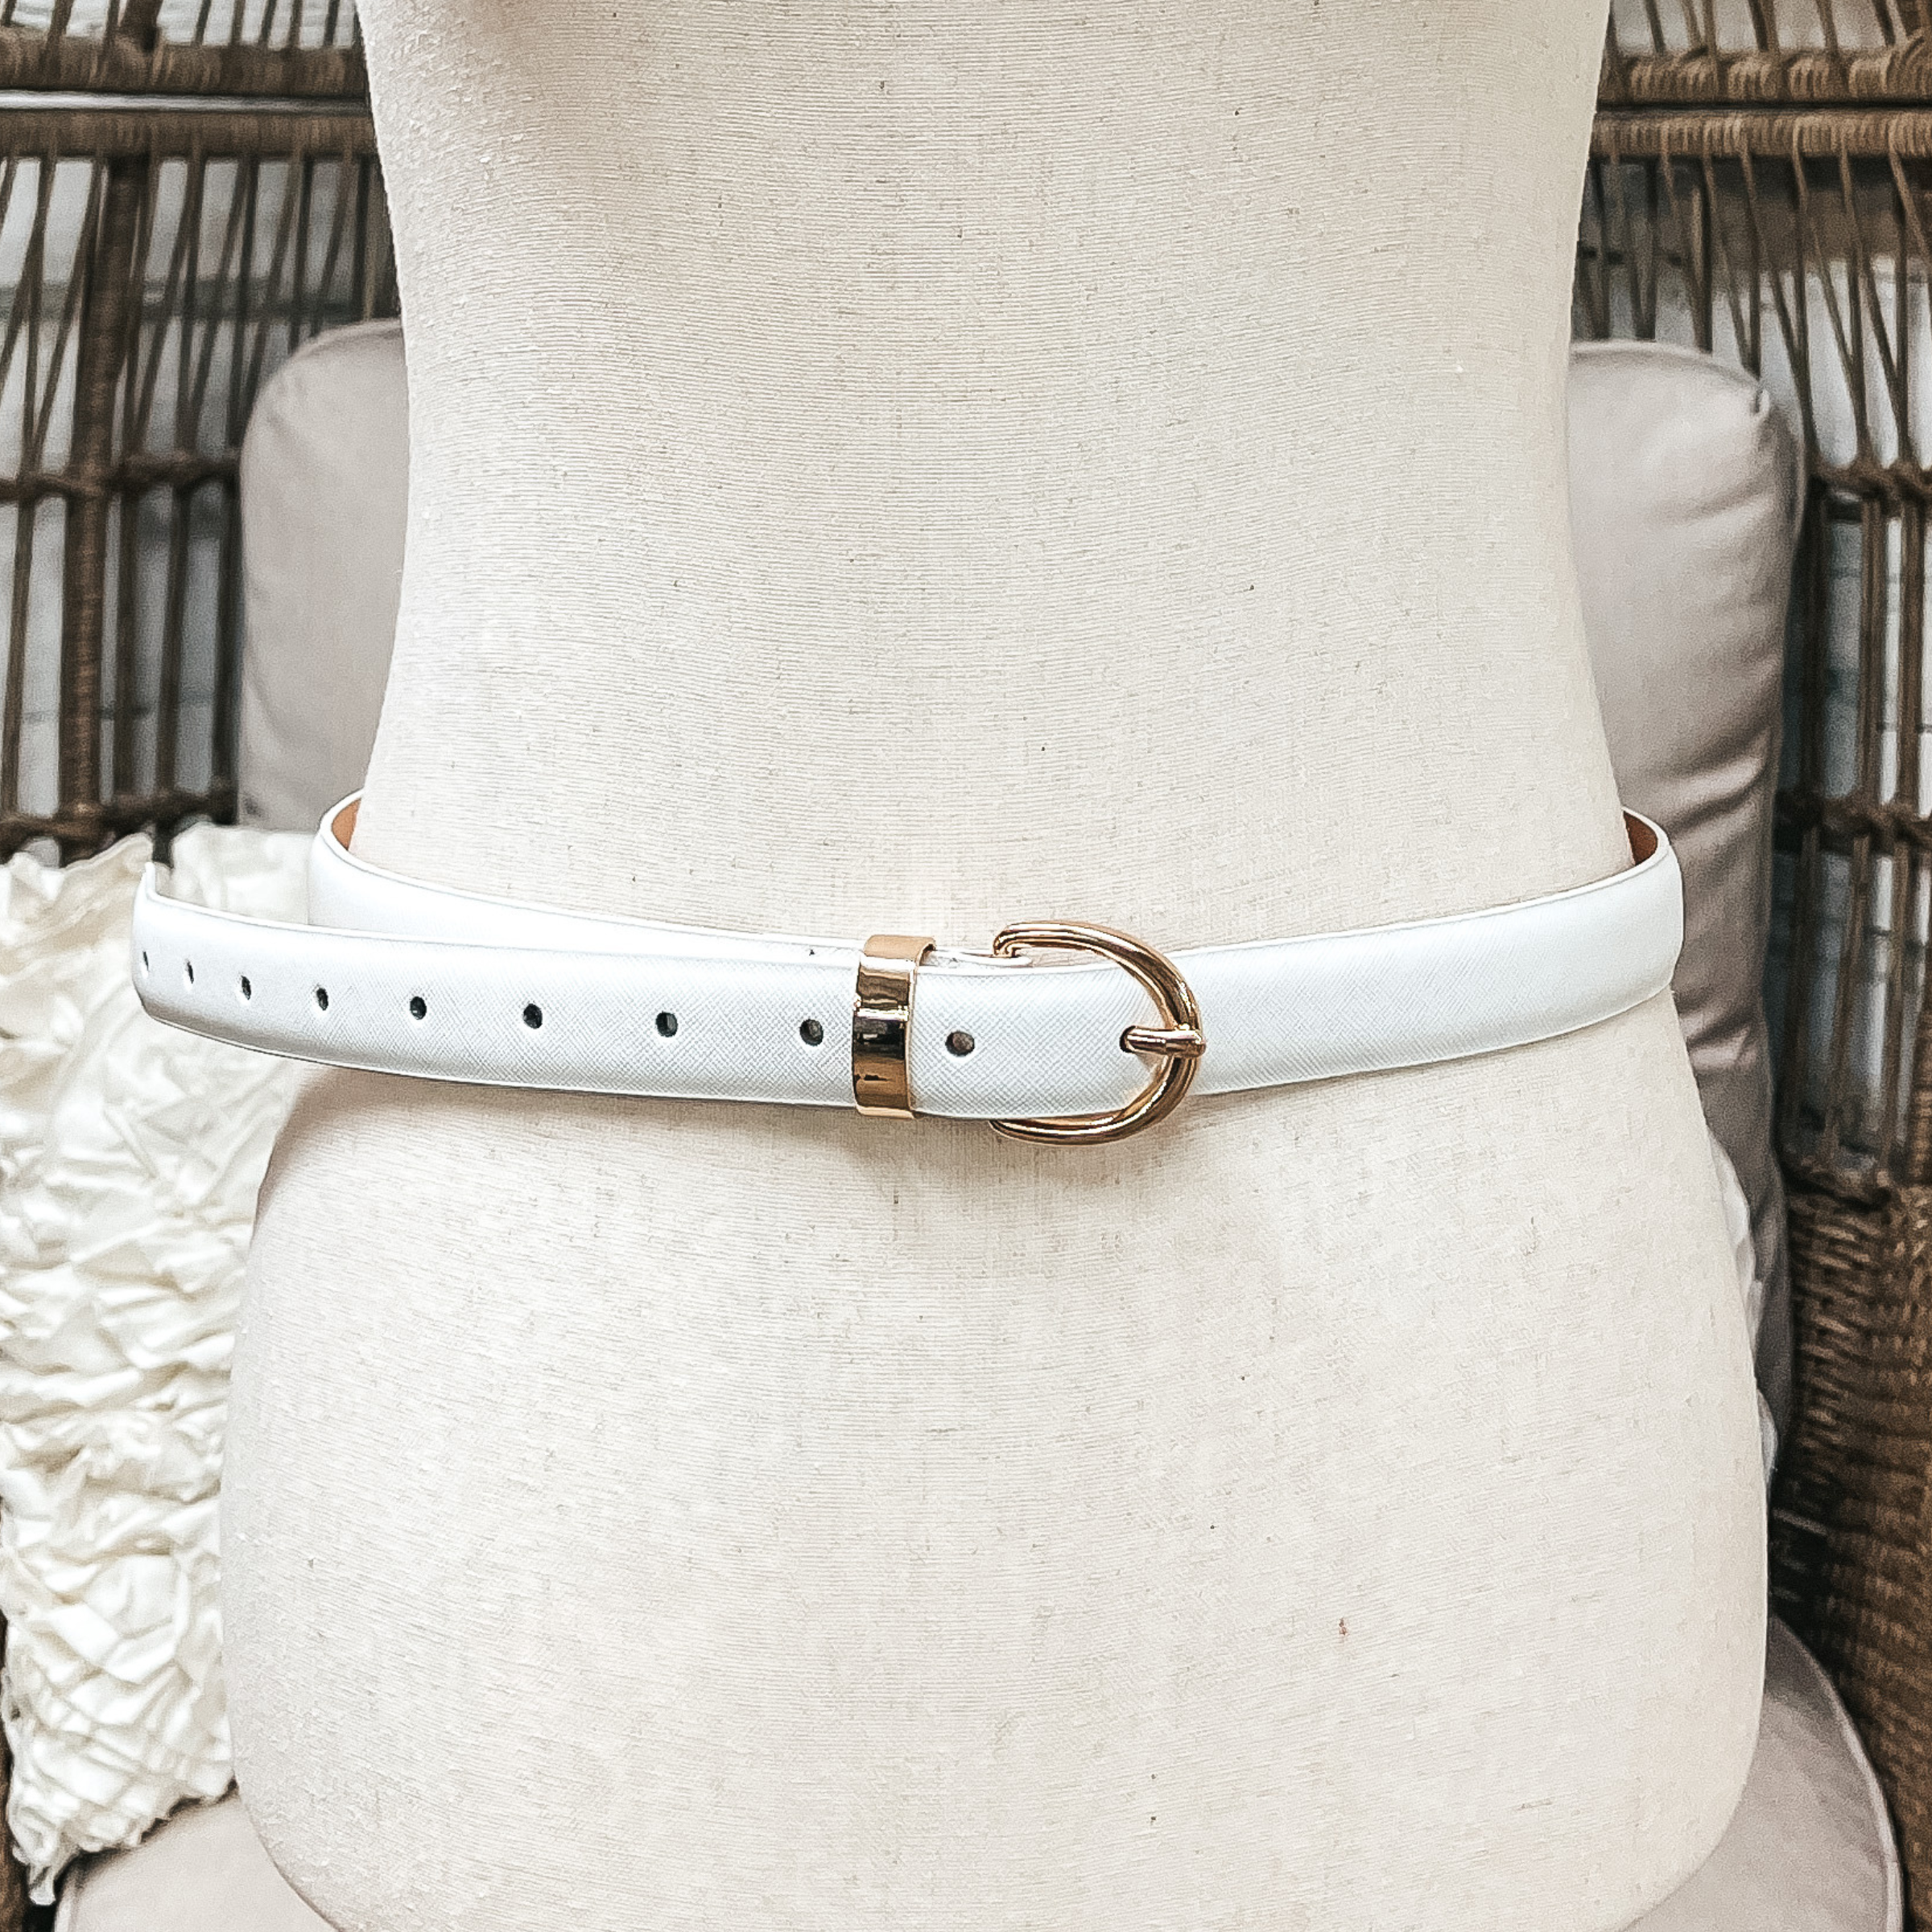 There is one skinny belt in white with a small oval buckle in gold. The belt  is placed on an ivory mannequin.